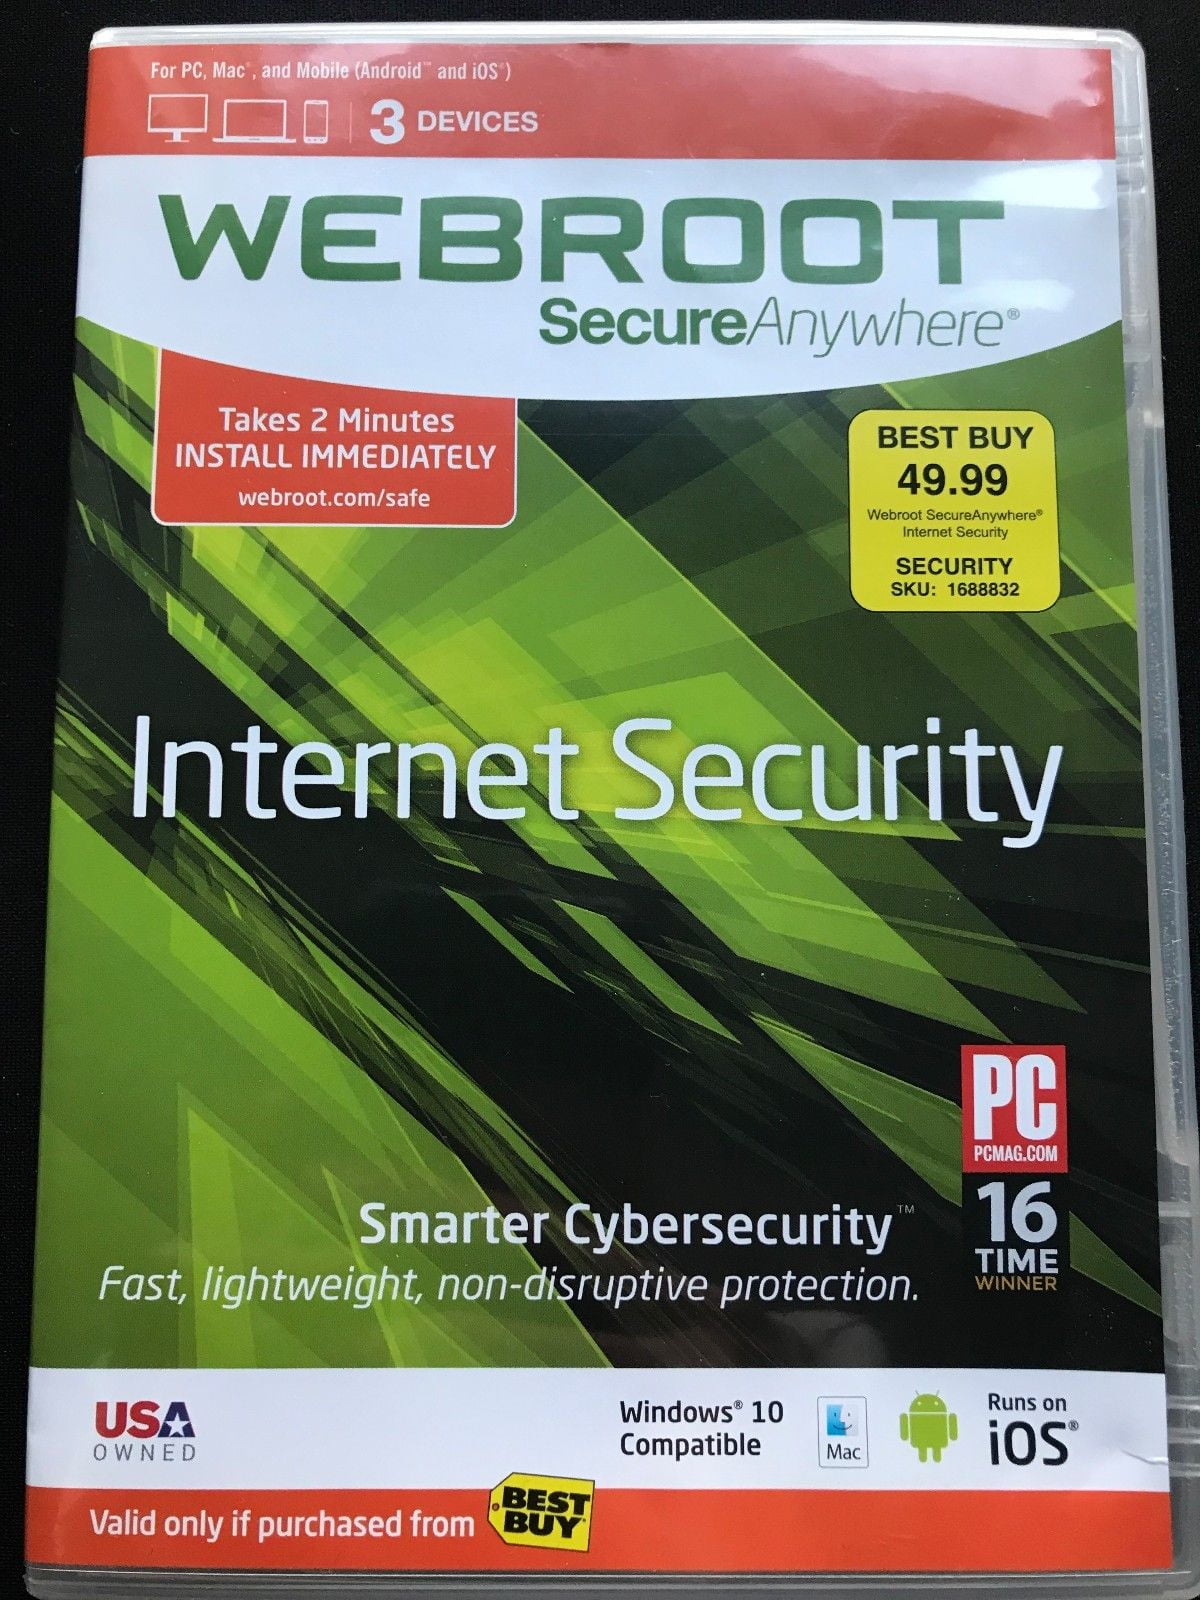 webroot secureanywhere internet security complete